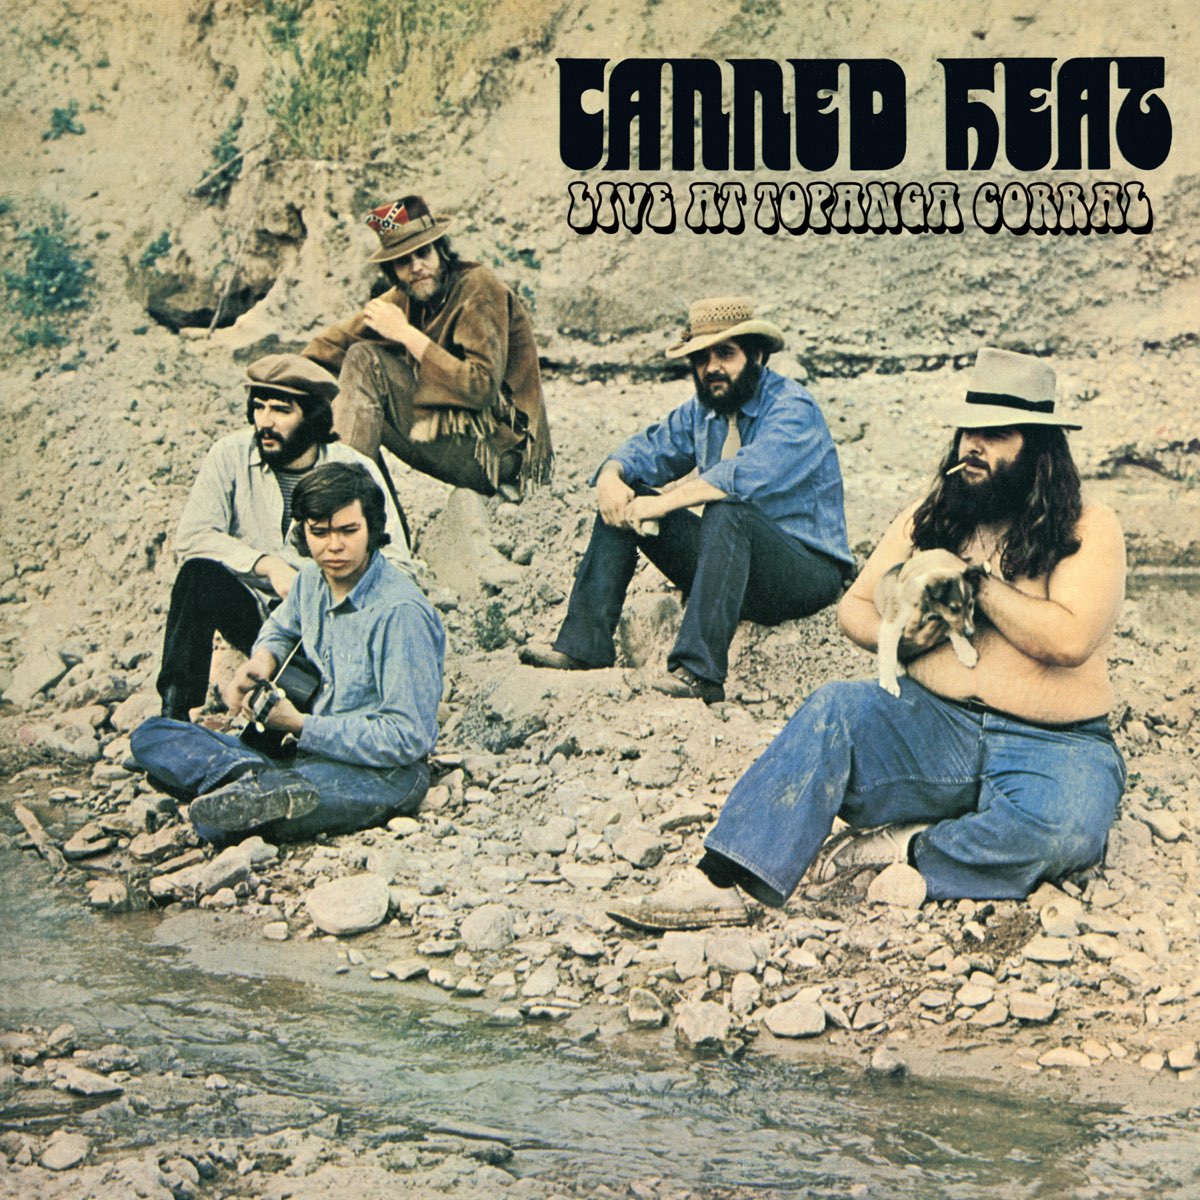 Canned heat steam фото 66